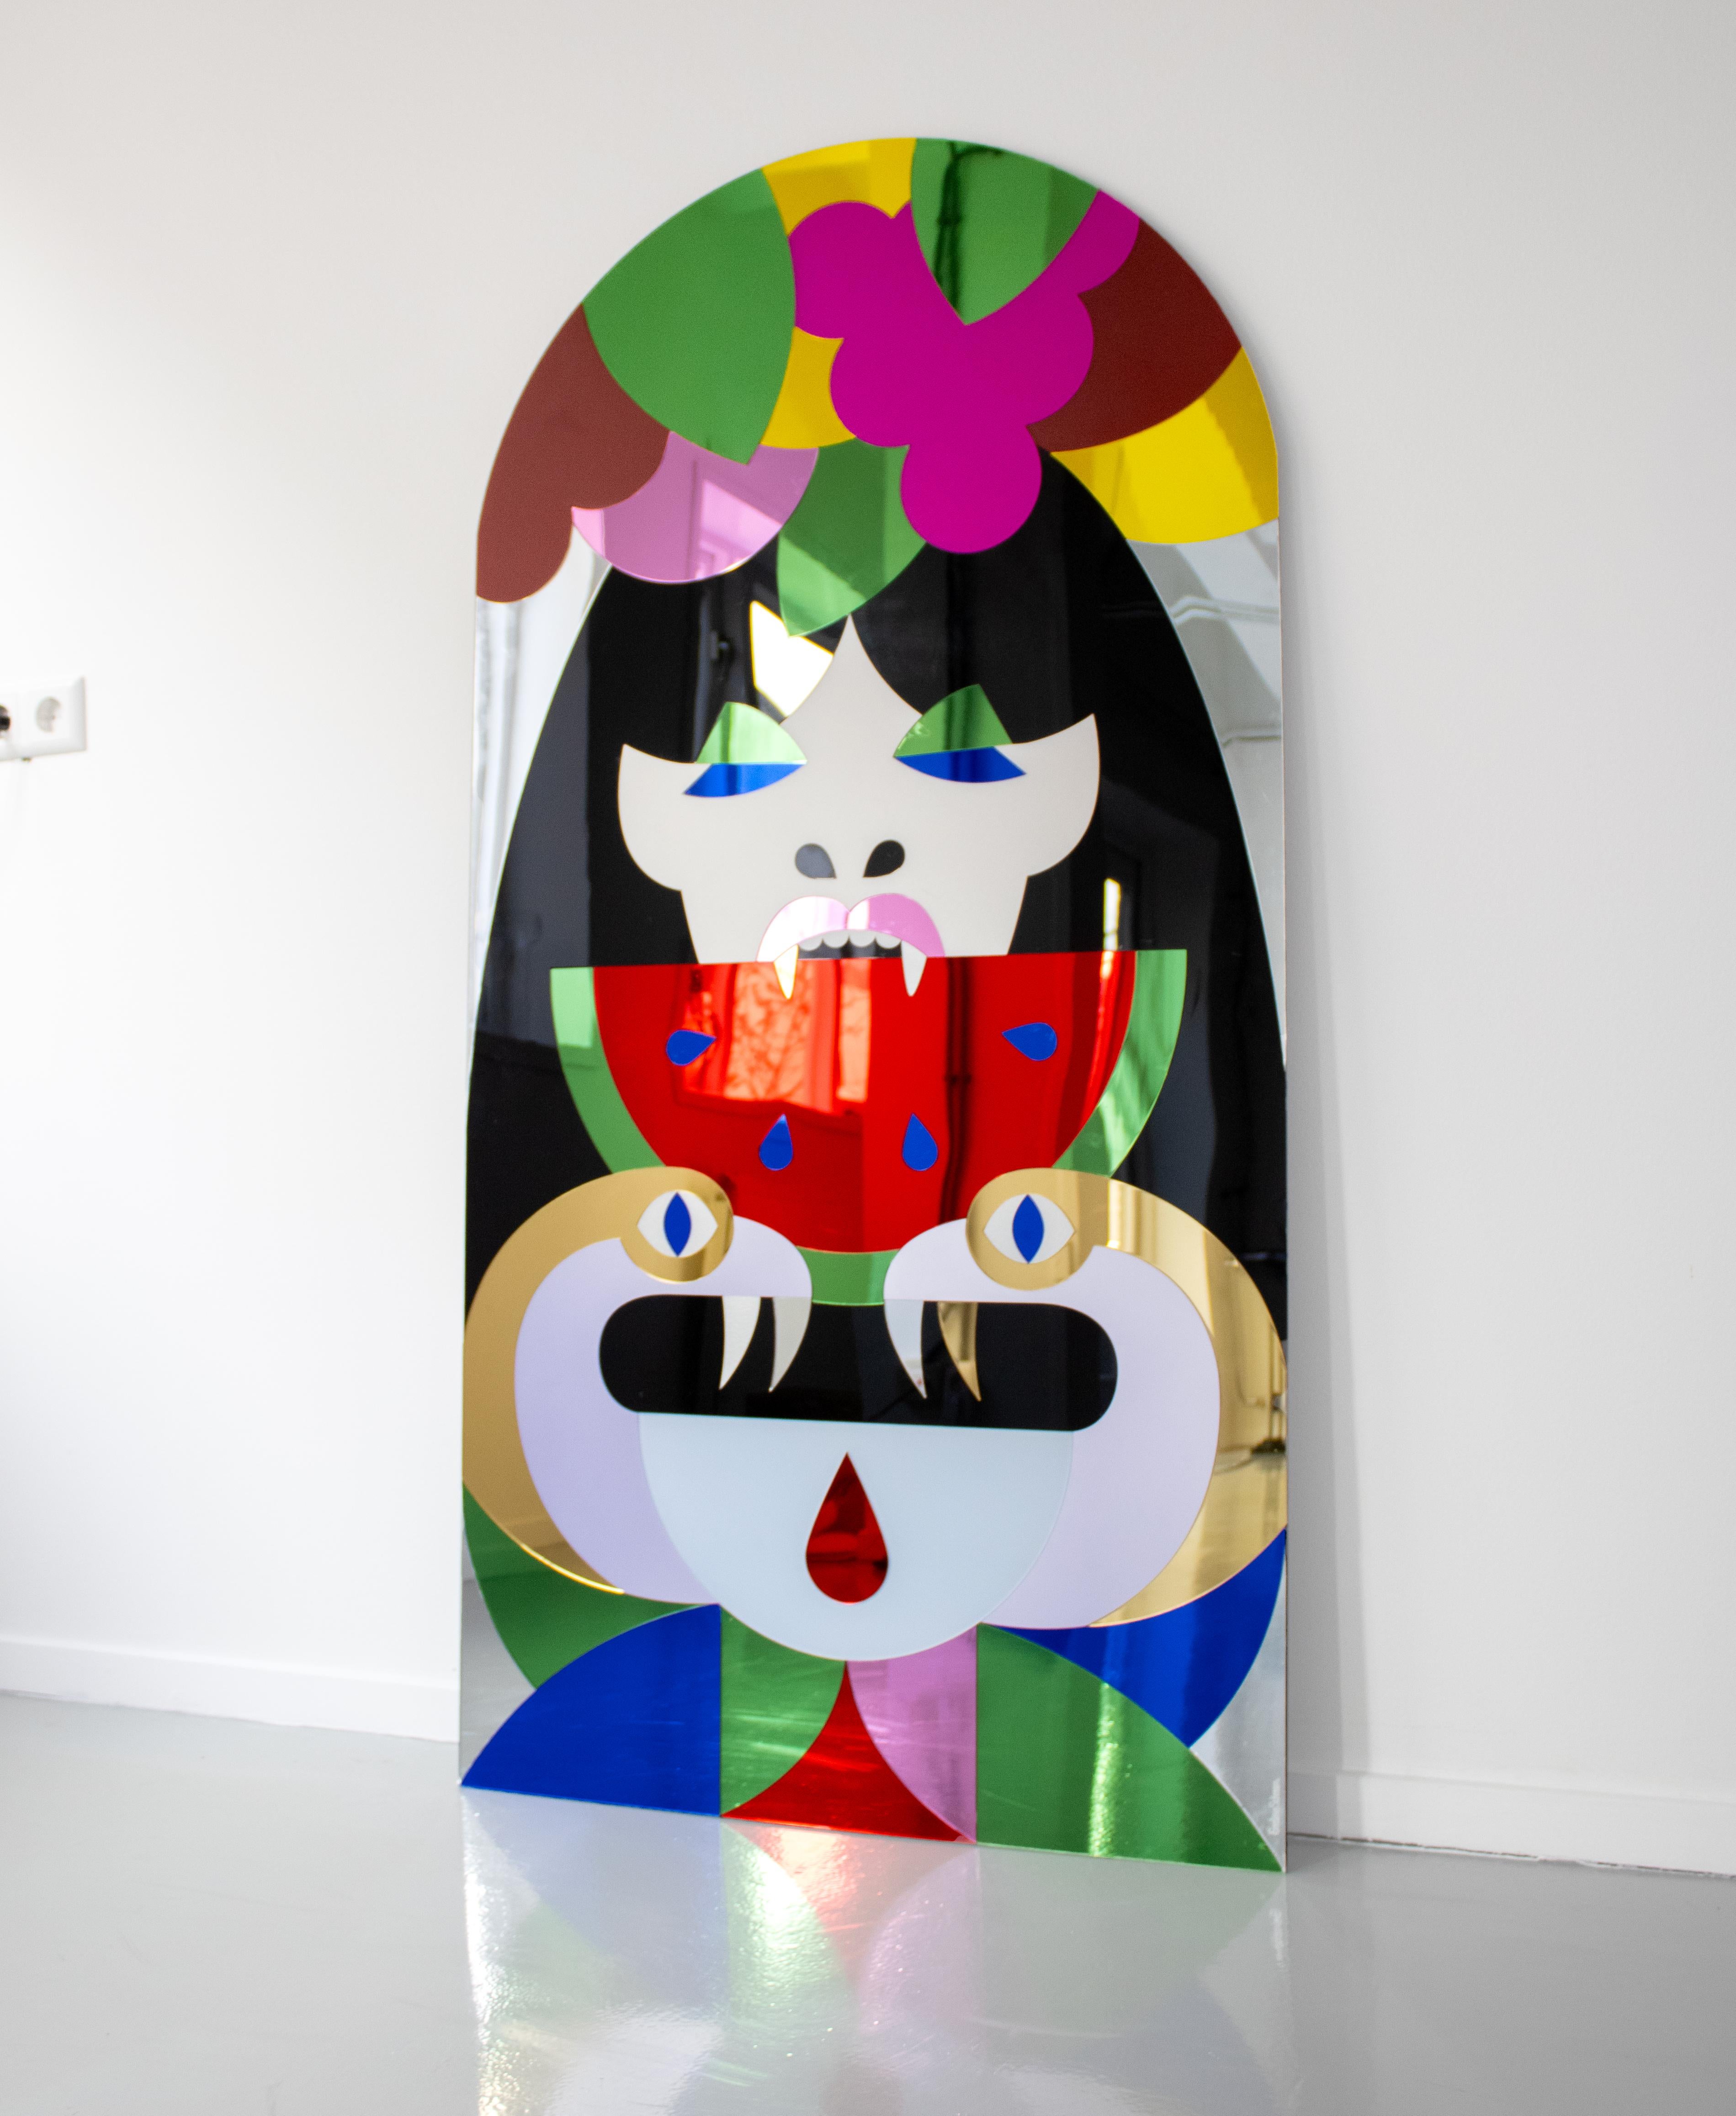 Forbidden Fruit is a 150cm tall colorful mirror artwork designed and created by Eveline Schram. The work is entirely made of a diverse array of plexiglass materials, including reflective colored mirror-, frost-, metallic- and stonelook surfaces. The